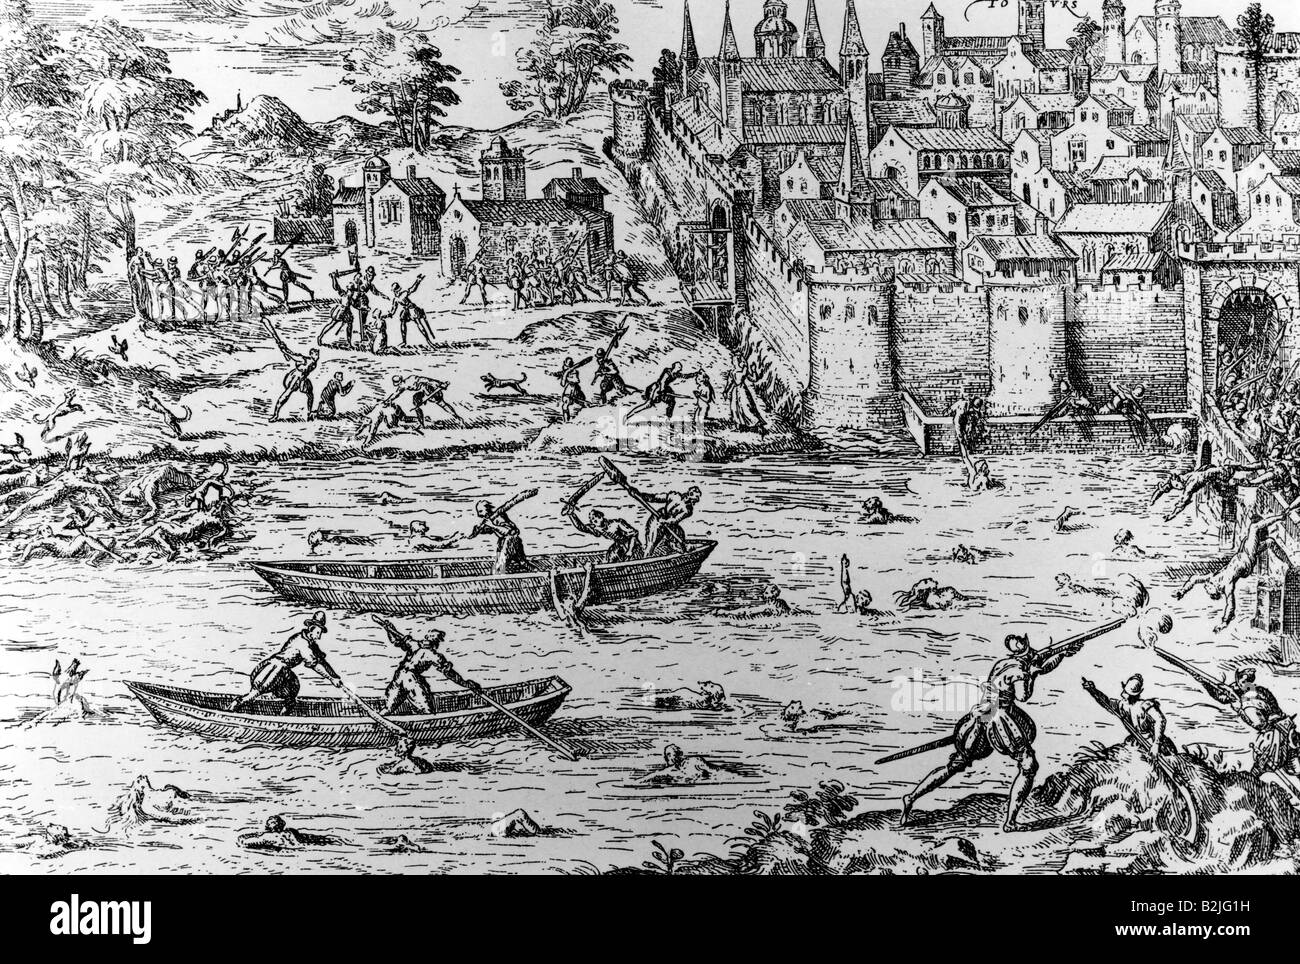 events, French Wars of Religion 1562 - 1598, first war 1562 - 1563, massacre of Tours, July 1562, copper engraving by Frans Hogenberg, 16th century, France, hugenotts, catholics, murder, Loire river, religion, christianity, religious wars, civil war, persecution, murder, bloodbath, historic, historical, people, Stock Photo